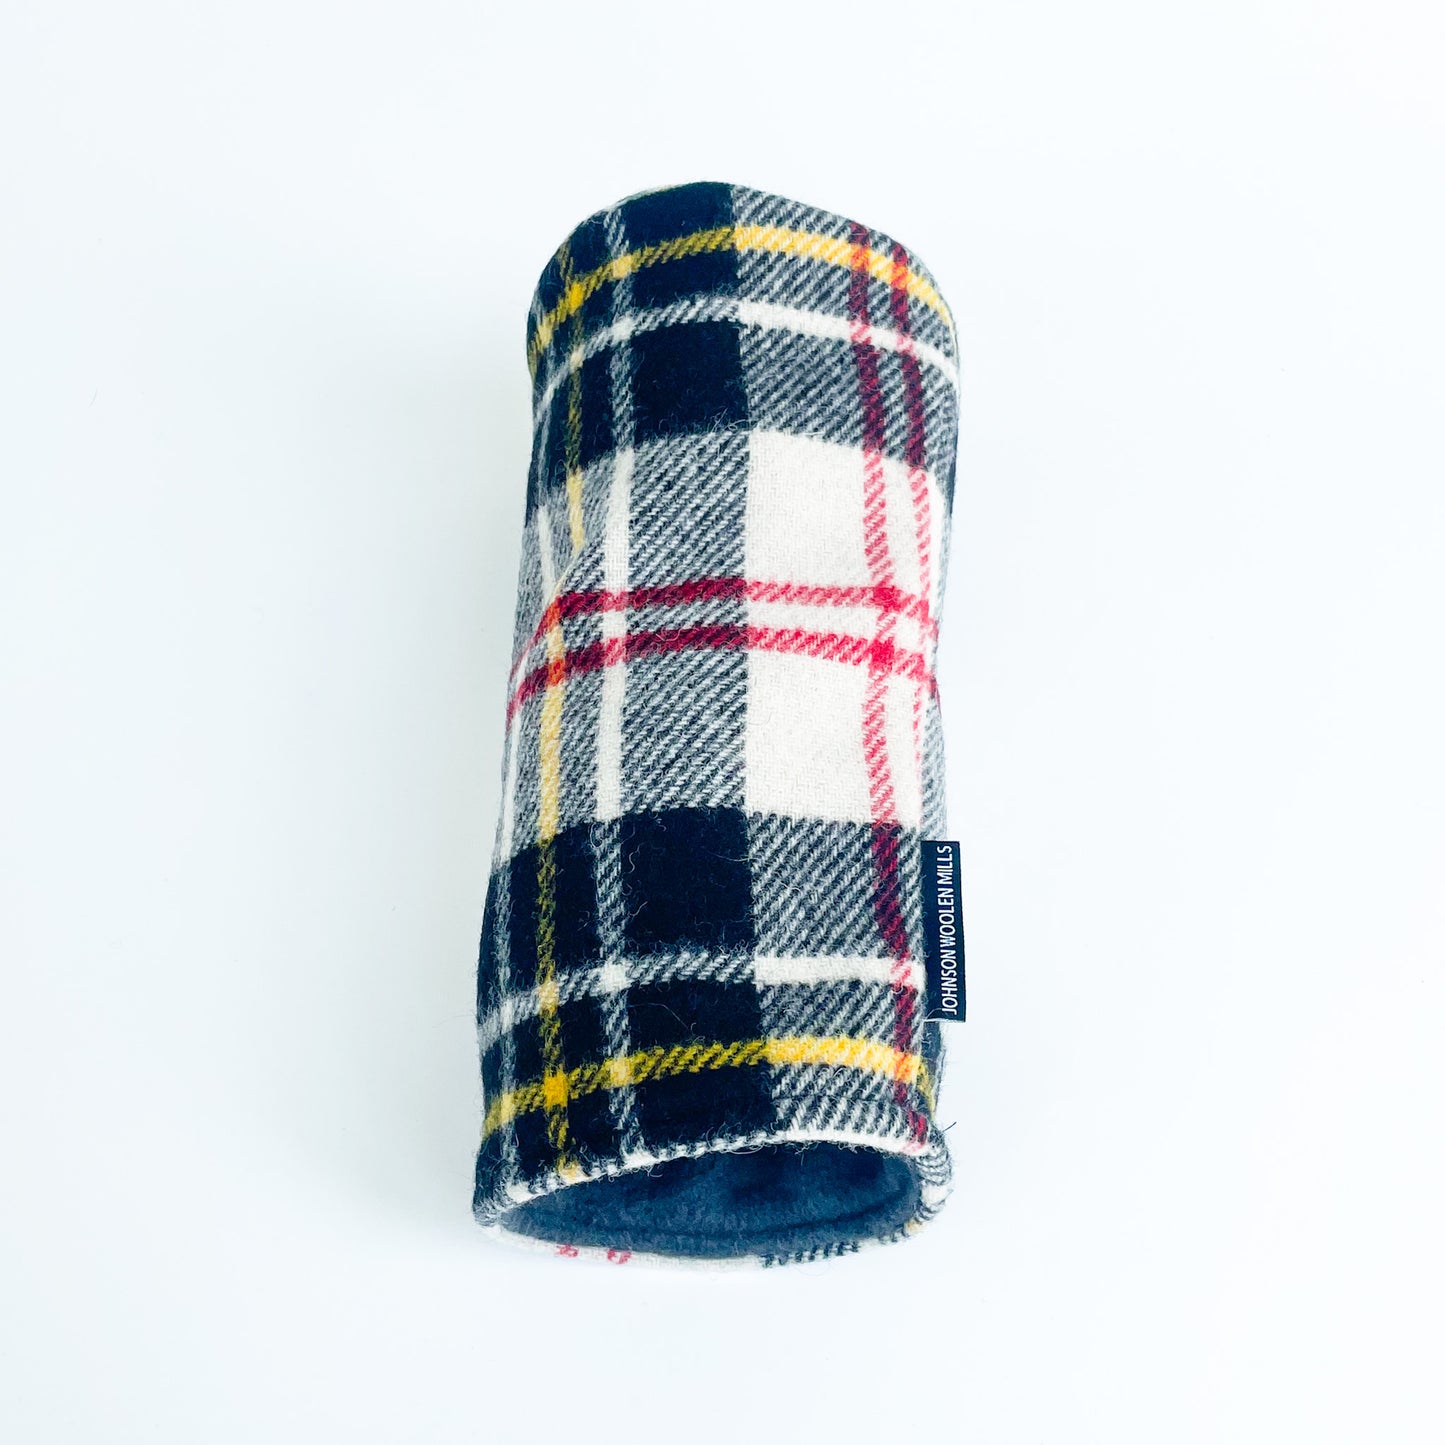 Wool Driver Headcover - Black White Yellow Red Plaid